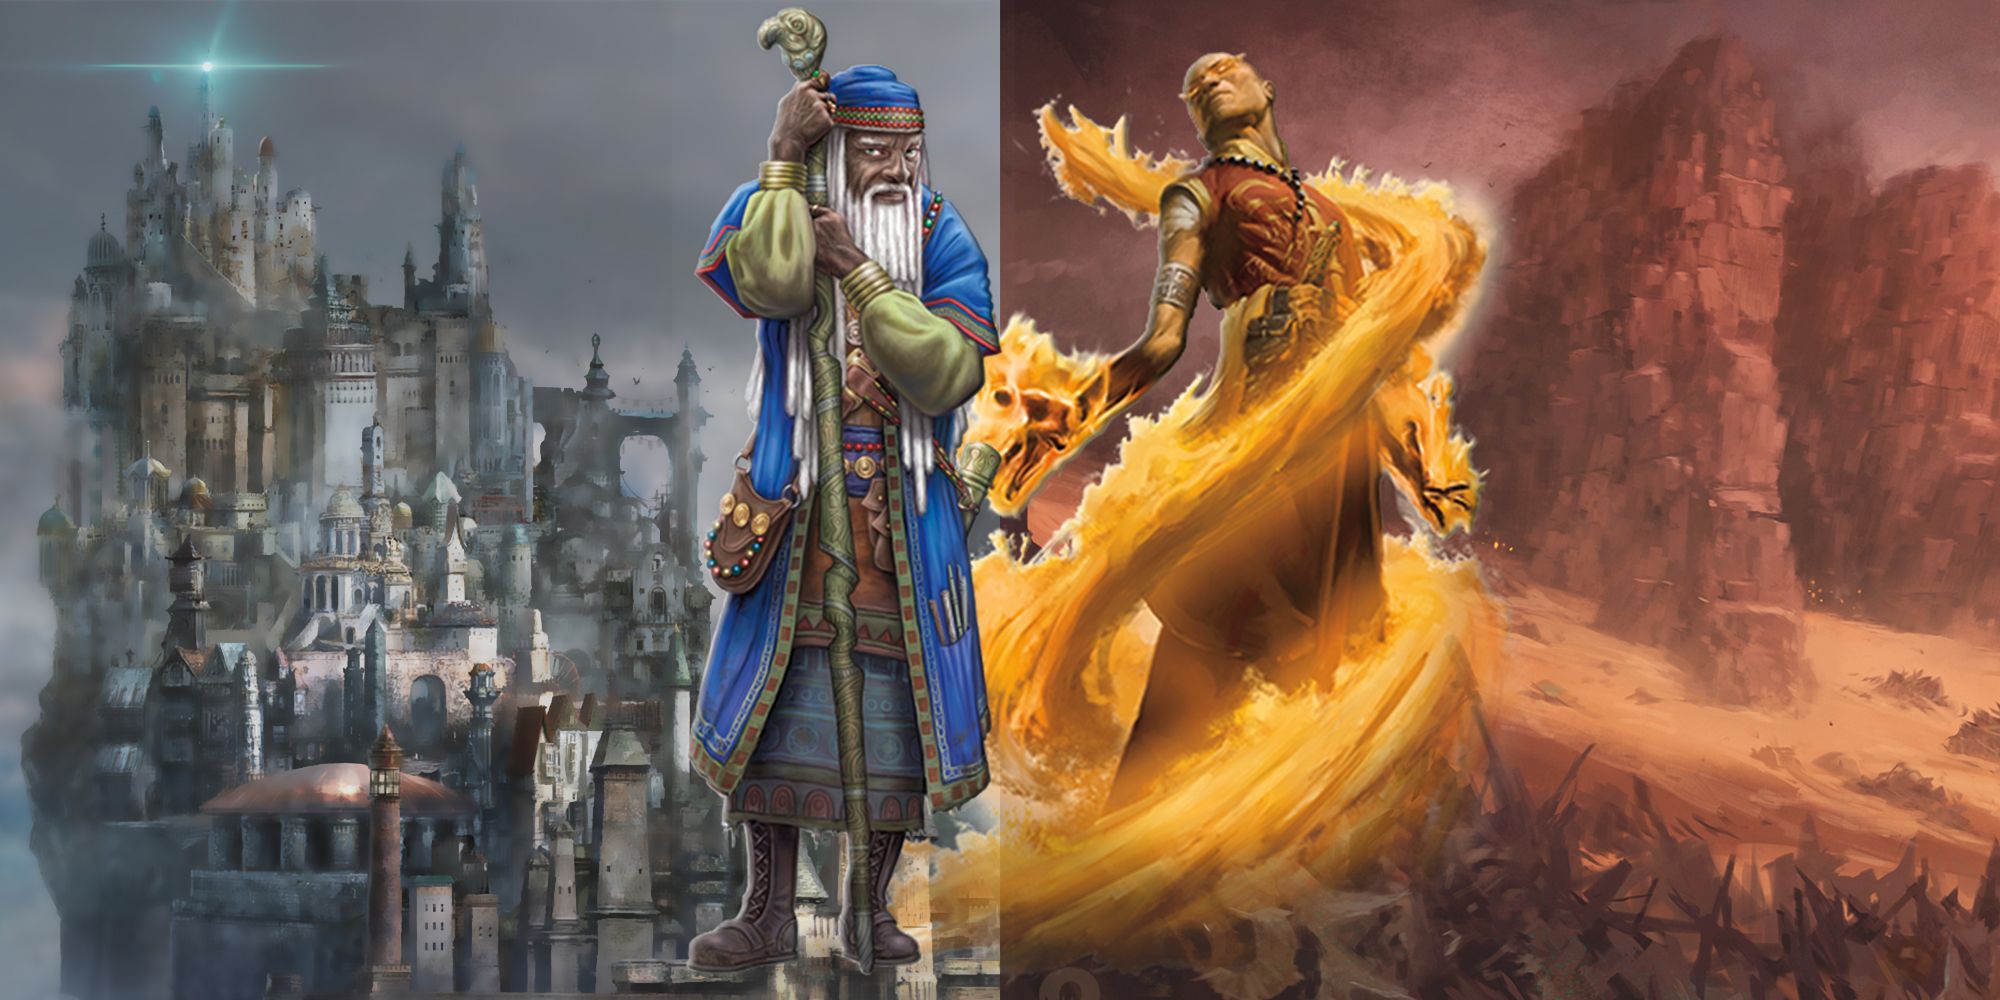 Wizards Vs Sorcerers in D&D (Which To Choose & Why)